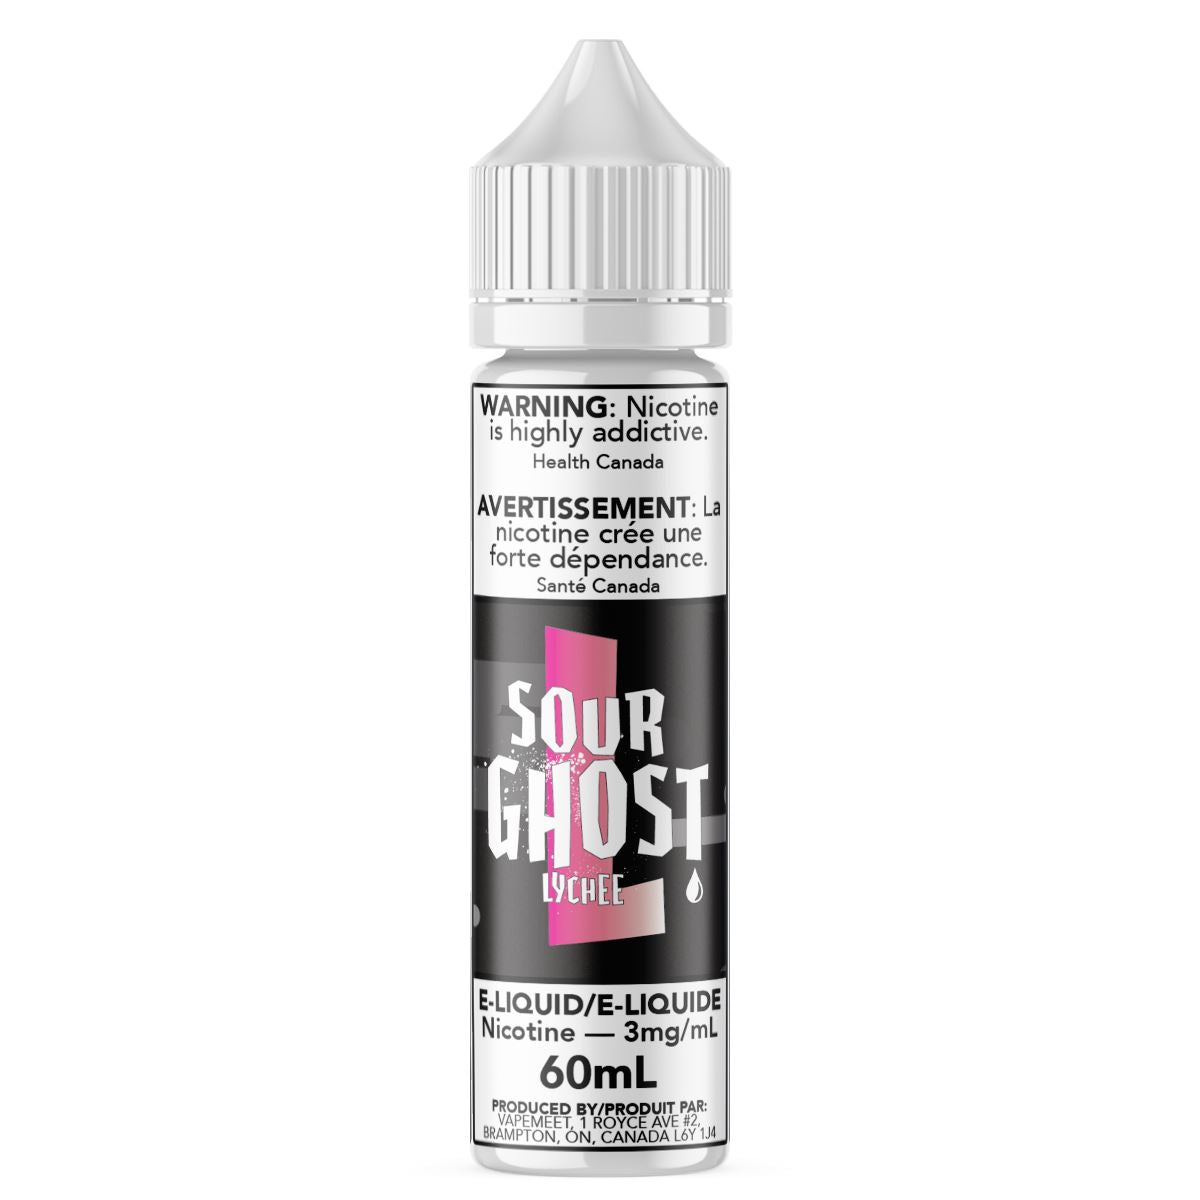 Sour Ghost - Lychee E-Liquid Ghosted 60mL 0 mg/mL 